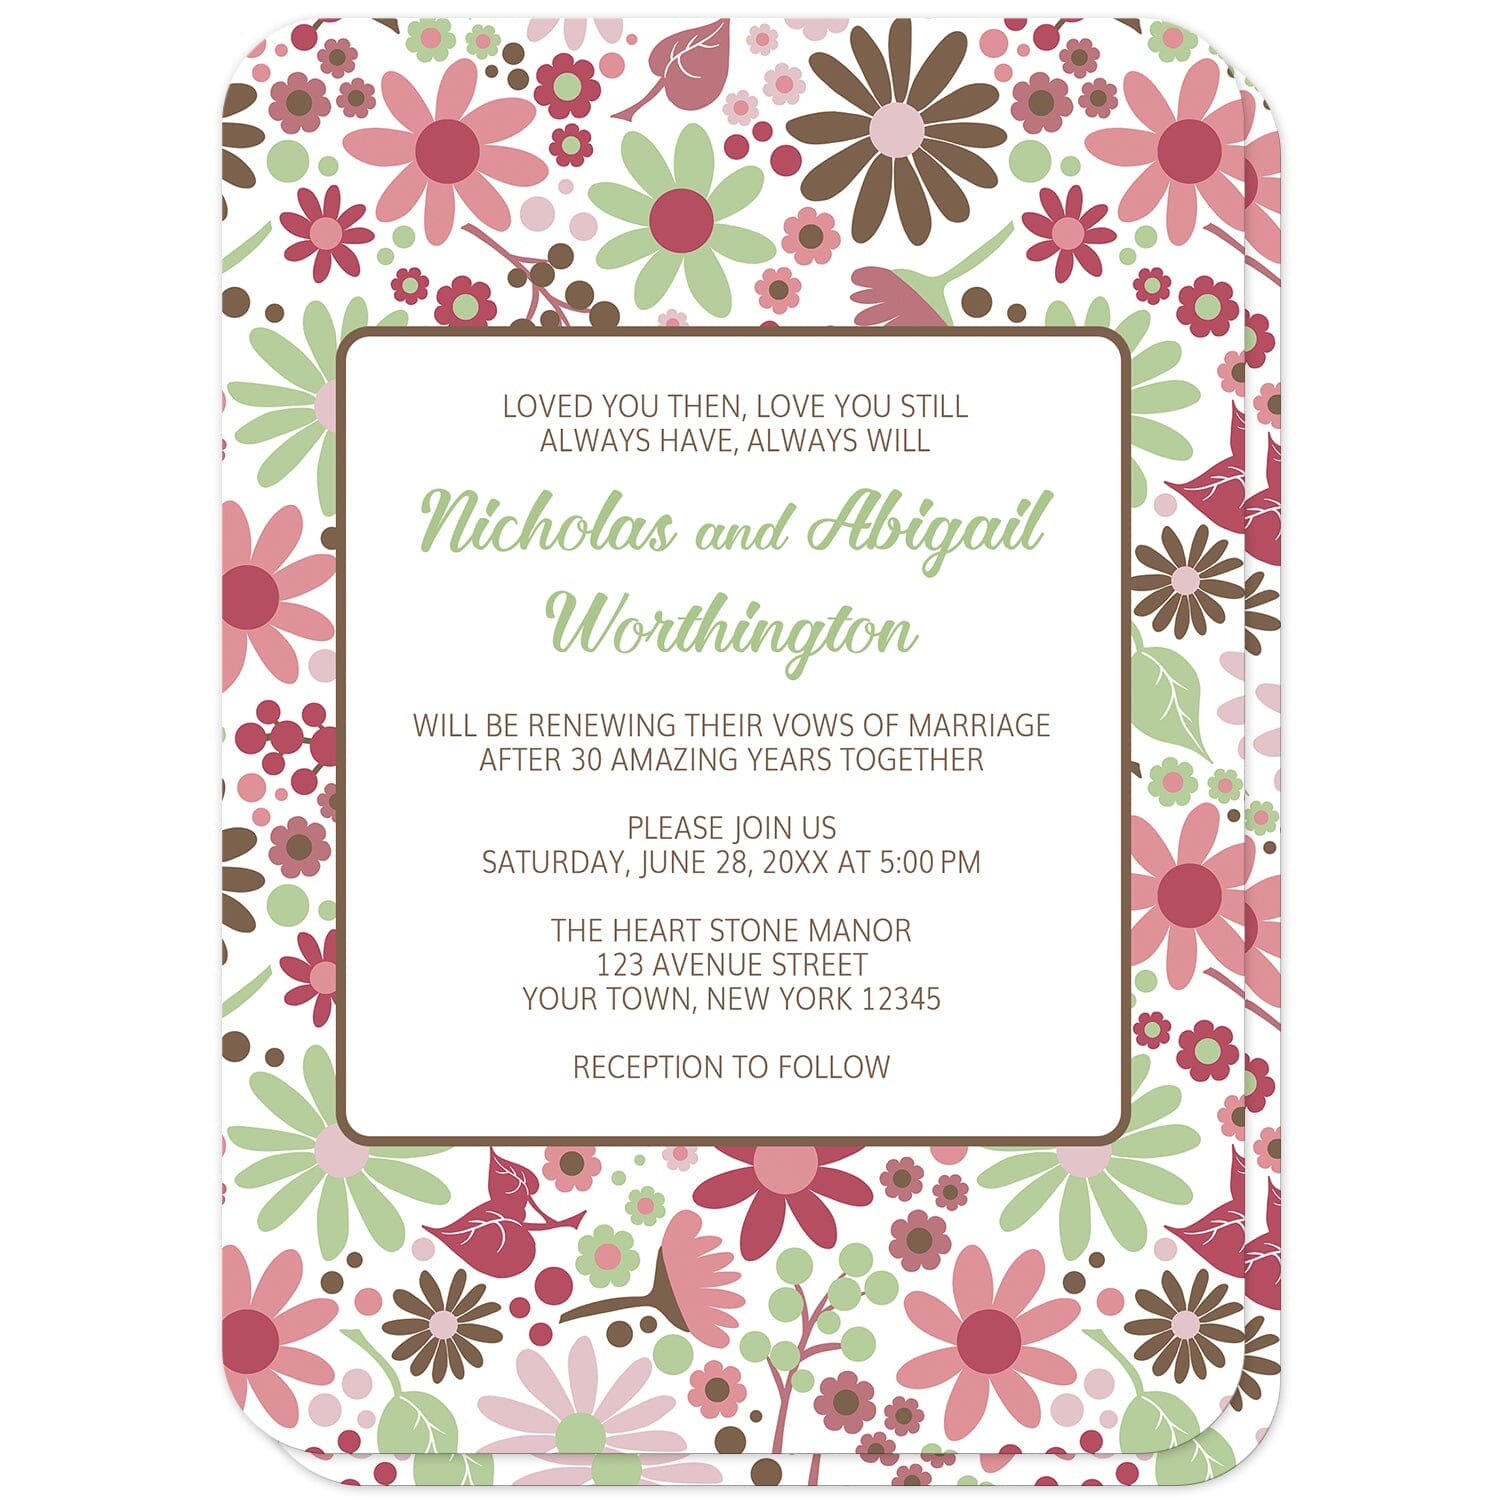 Berry Green Summer Flowers Vow Renewal Invitations (front with rounded corners) at Artistically Invited. Beautiful berry green summer flowers vow renewal invitations designed with a pretty summer floral pattern in different hues of berry pink with green and brown. Personalize these invitations with your occasion details for renewing your vows. They're a gorgeous option for any couple who loves floral designs as they're covered in this flowers pattern on both the front and back of the invitations. 